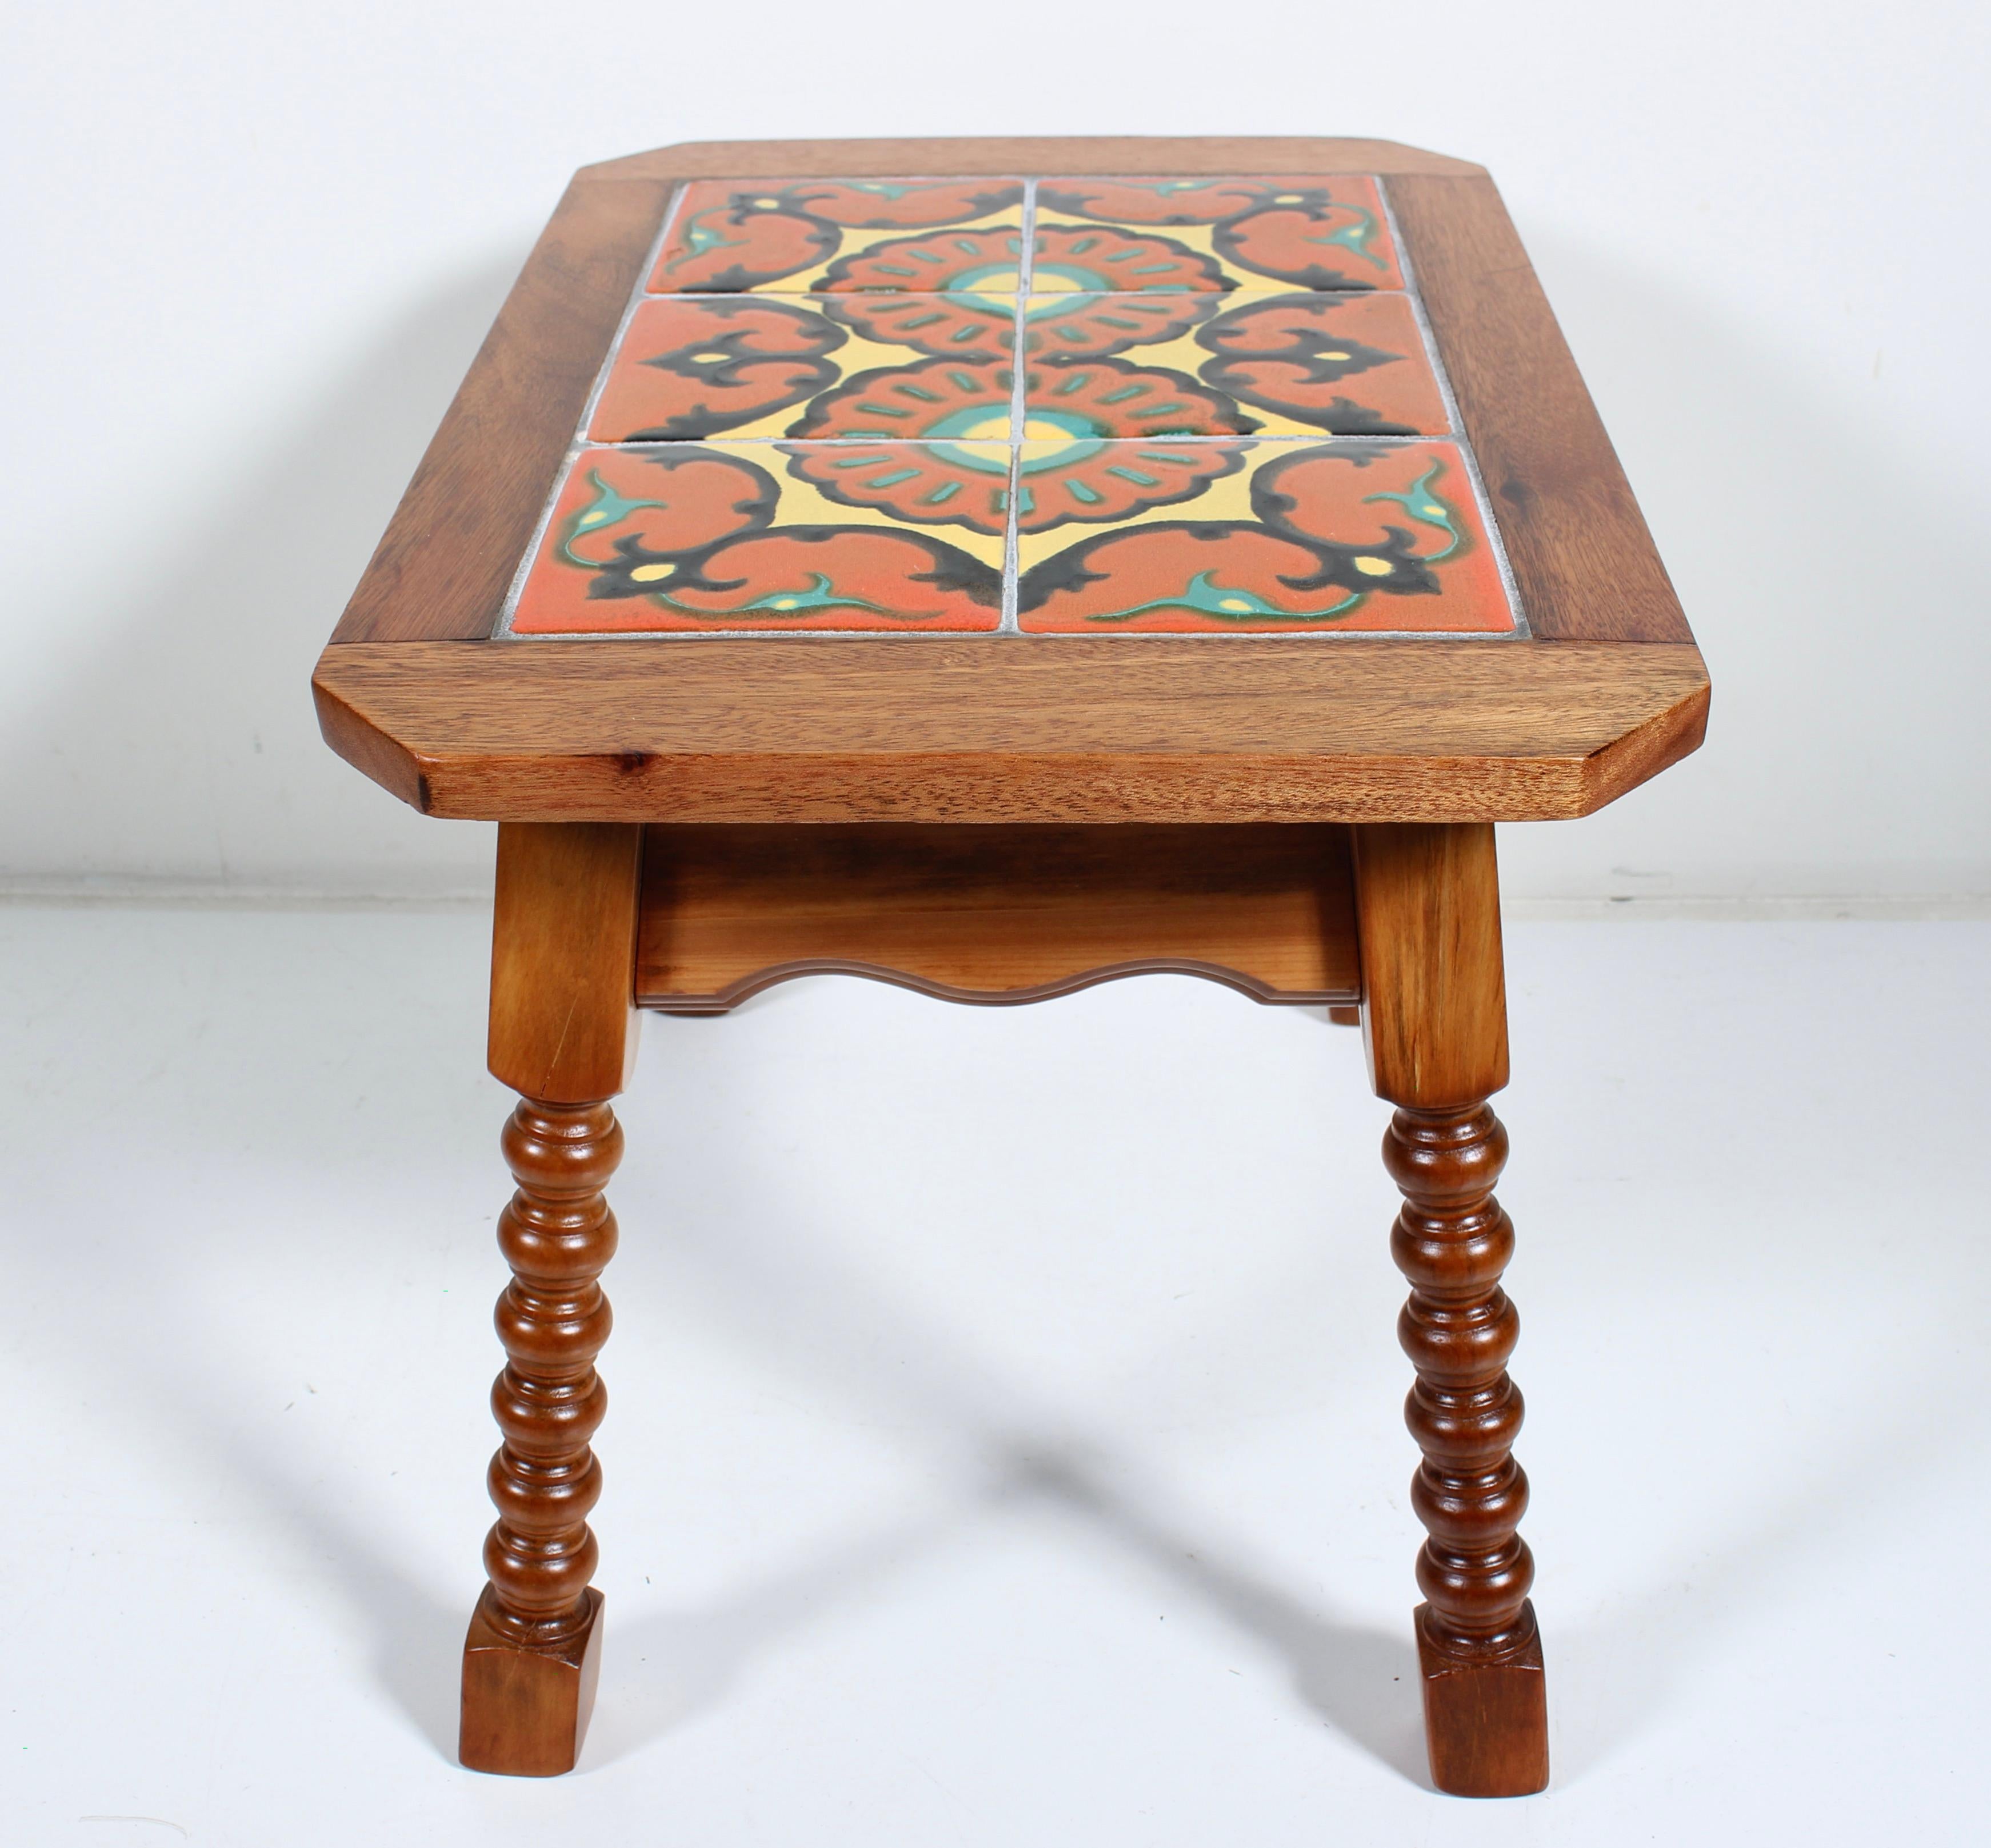 Monterey Style Turned End Table with Orange & Yellow Spanish Tiles, C. 1930 For Sale 1